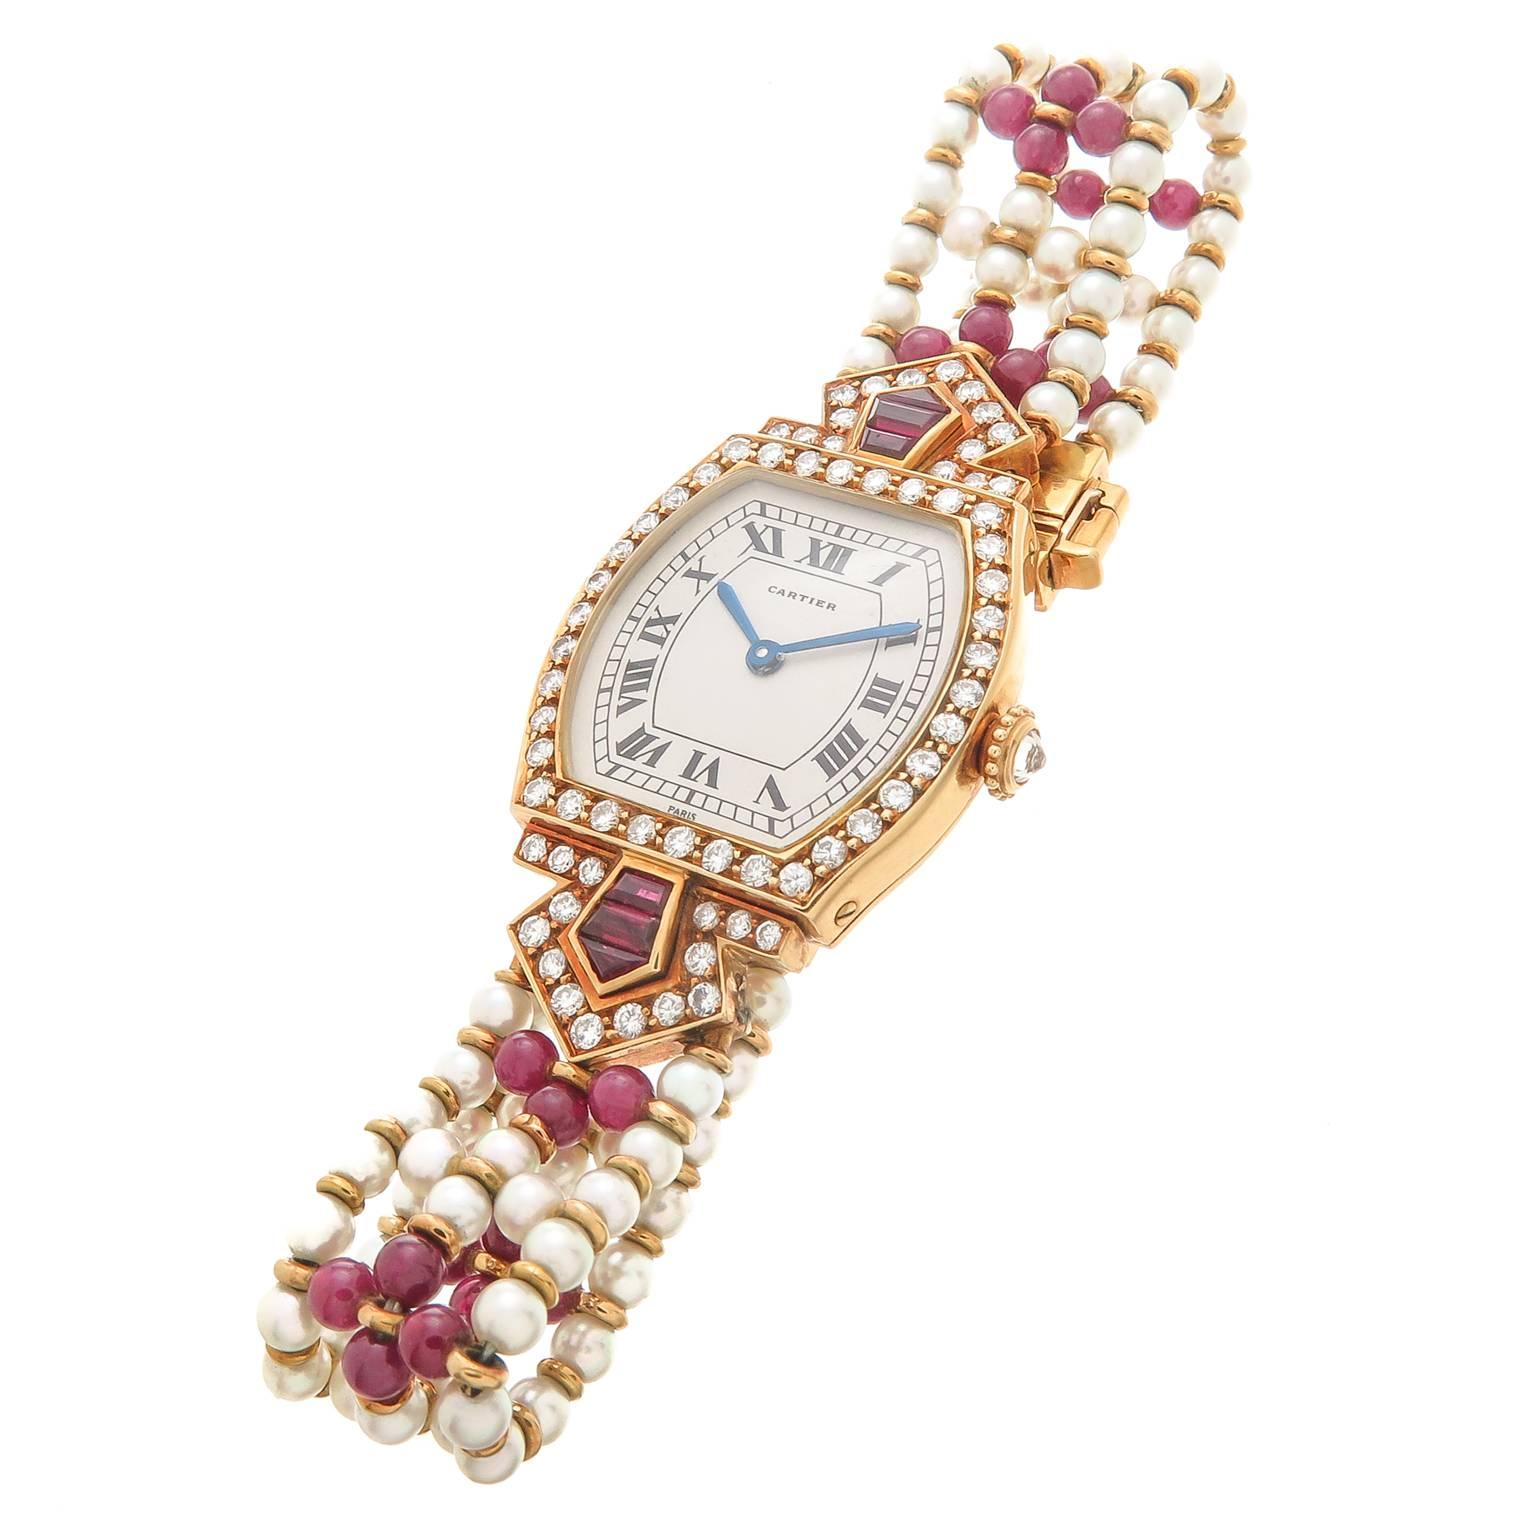 Circa 1990 Cartier Tortue Collection 18K yellow Gold and Gem set Ladies Wrist Watch. 40 MM X 23 MM Water Resistant case, set with Round Brilliant cut Diamonds and Fancy cut Rubies of very Fine Color and a Diamond set Crown. Manual wind Mechanical